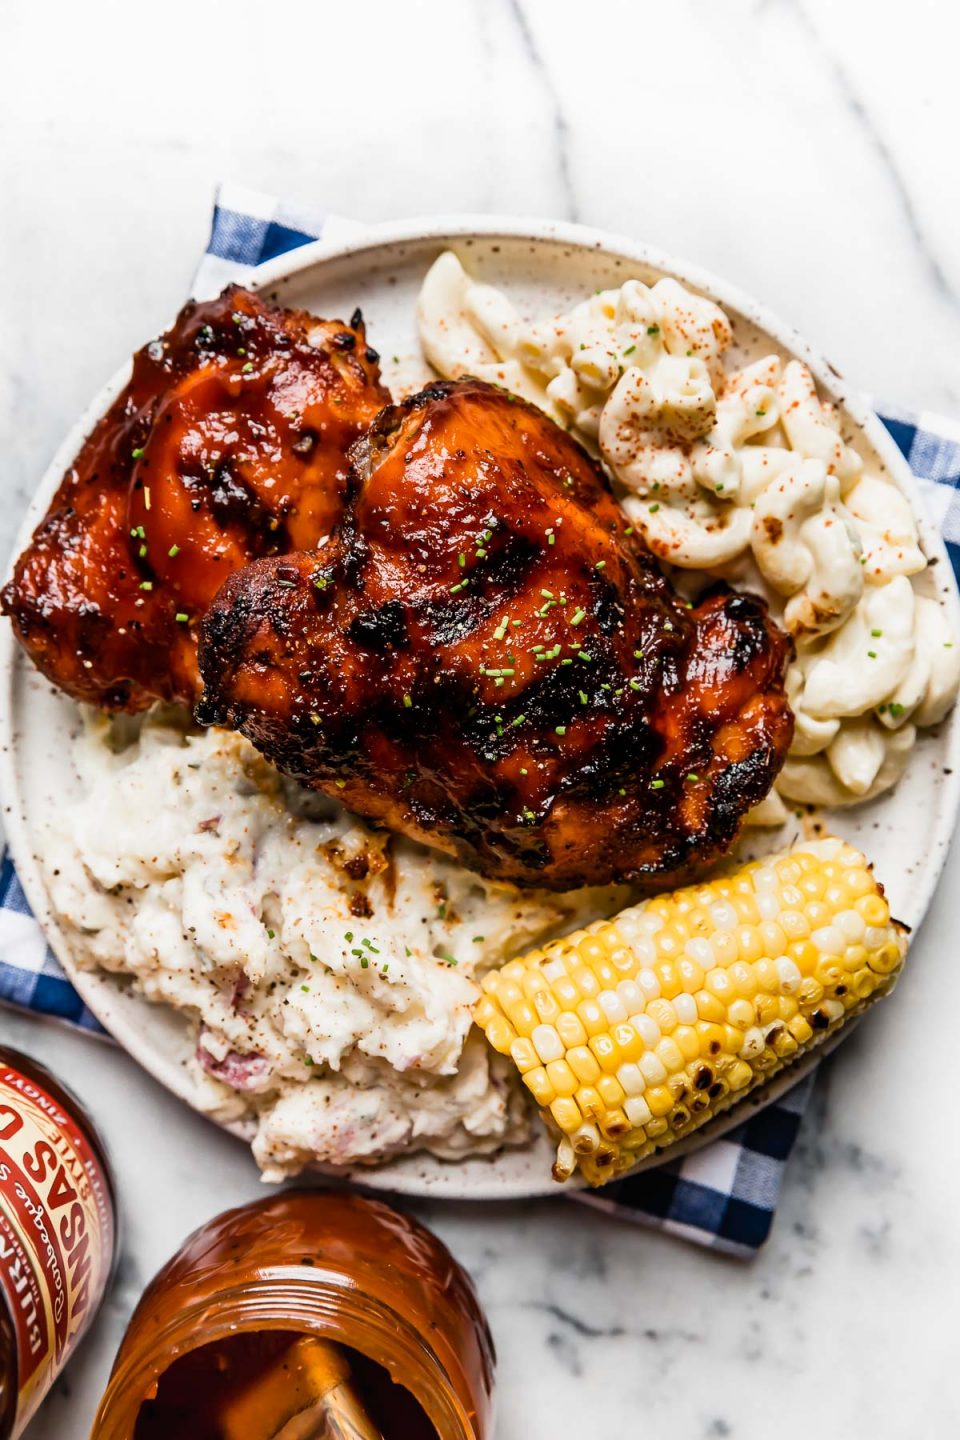 Grilled BBQ chicken on a plate with macaroni salad, potato salad, & corn on the cob. Next to the plate is a bottle of barbecue sauce from ALDI.